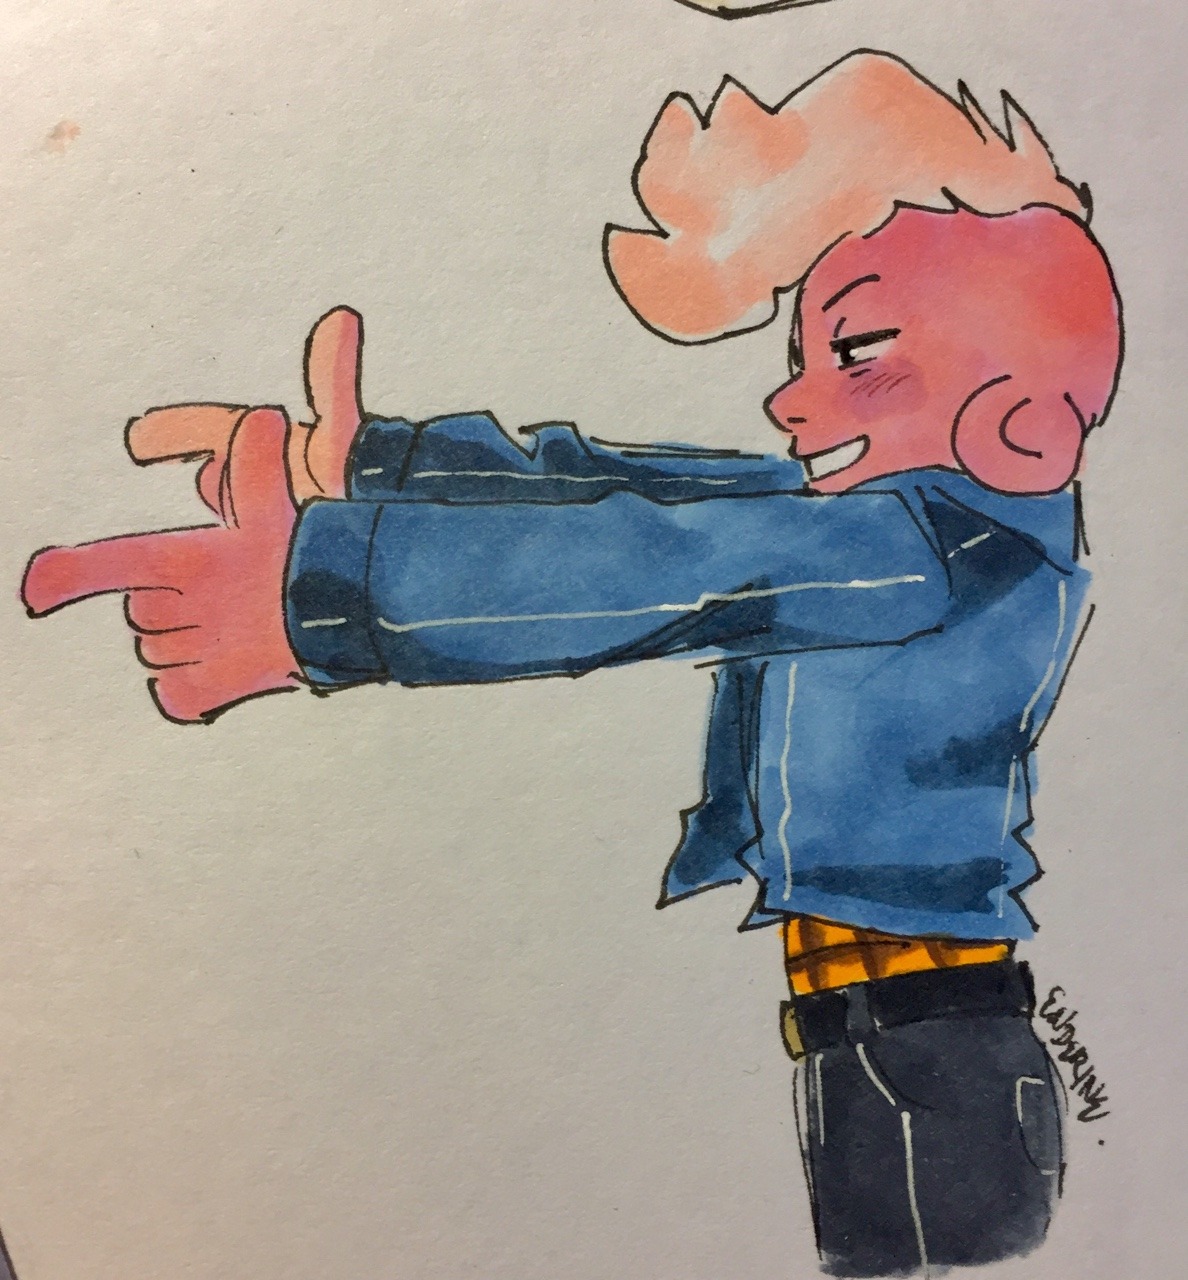 There’s not enough Lars content being added to the tag so I decided to take matters into my own hands Featuring: some of my wardrobe